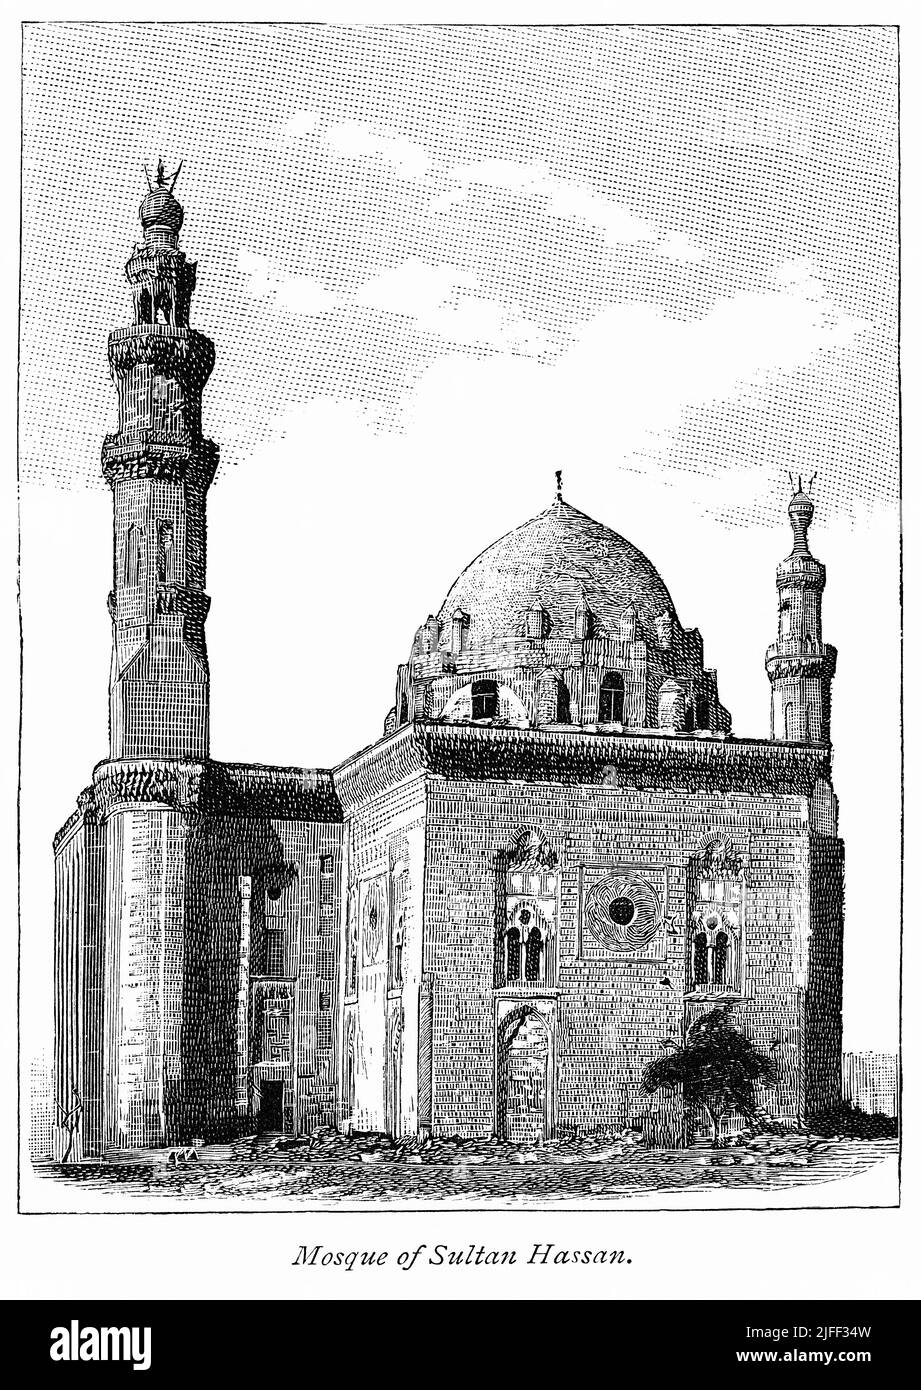 Mosque-Madrasa of Sultan Hassan, Illustration from the Book, 'From Pharaoh to Fellah' by C.F. Moberly Bell with Illustrations by Georges Montbard, engraved by Charles Barbant, Wells Gardner, Darton, & Co., London, 1888 Stock Photo